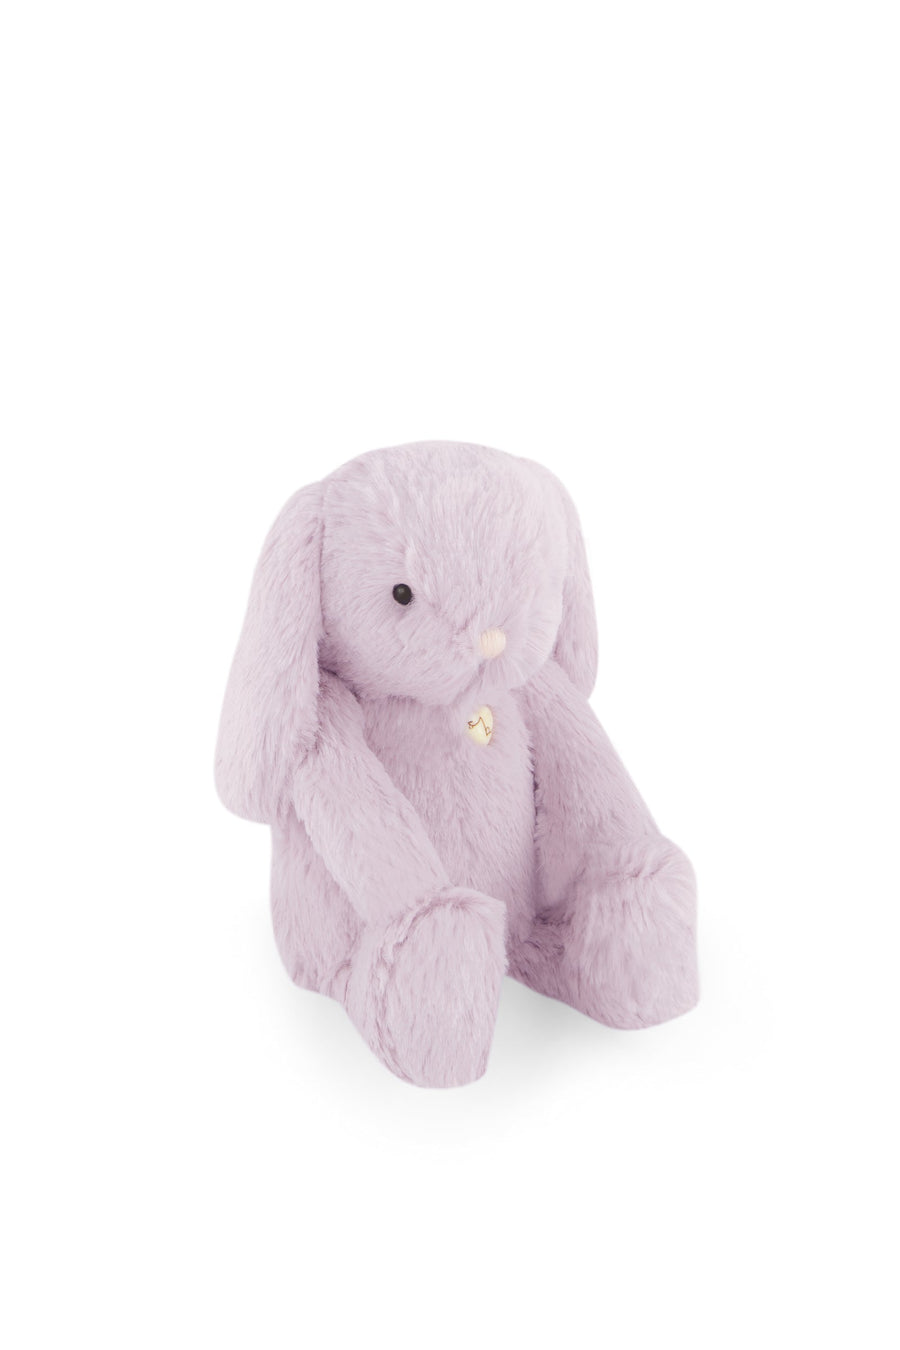 Snuggle Bunnies - Penelope the Bunny - Violet Childrens Toy from Jamie Kay USA